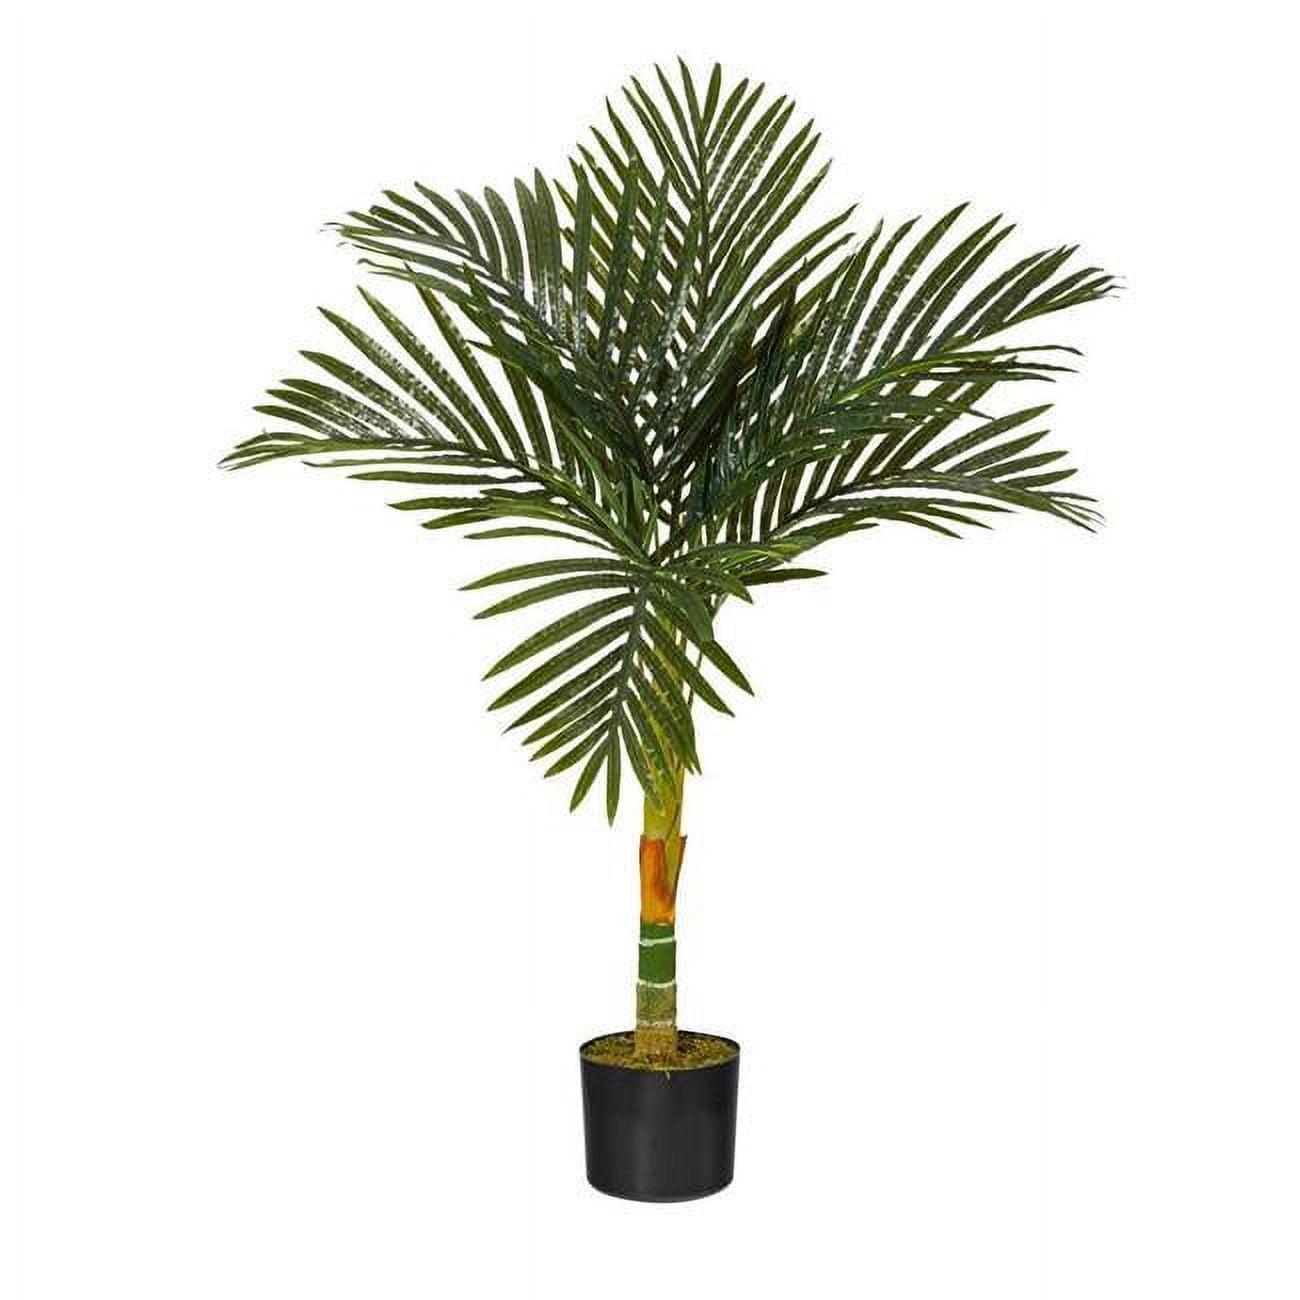 Tropic Breeze 3' Golden Cane Palm in Bamboo-Like Planter